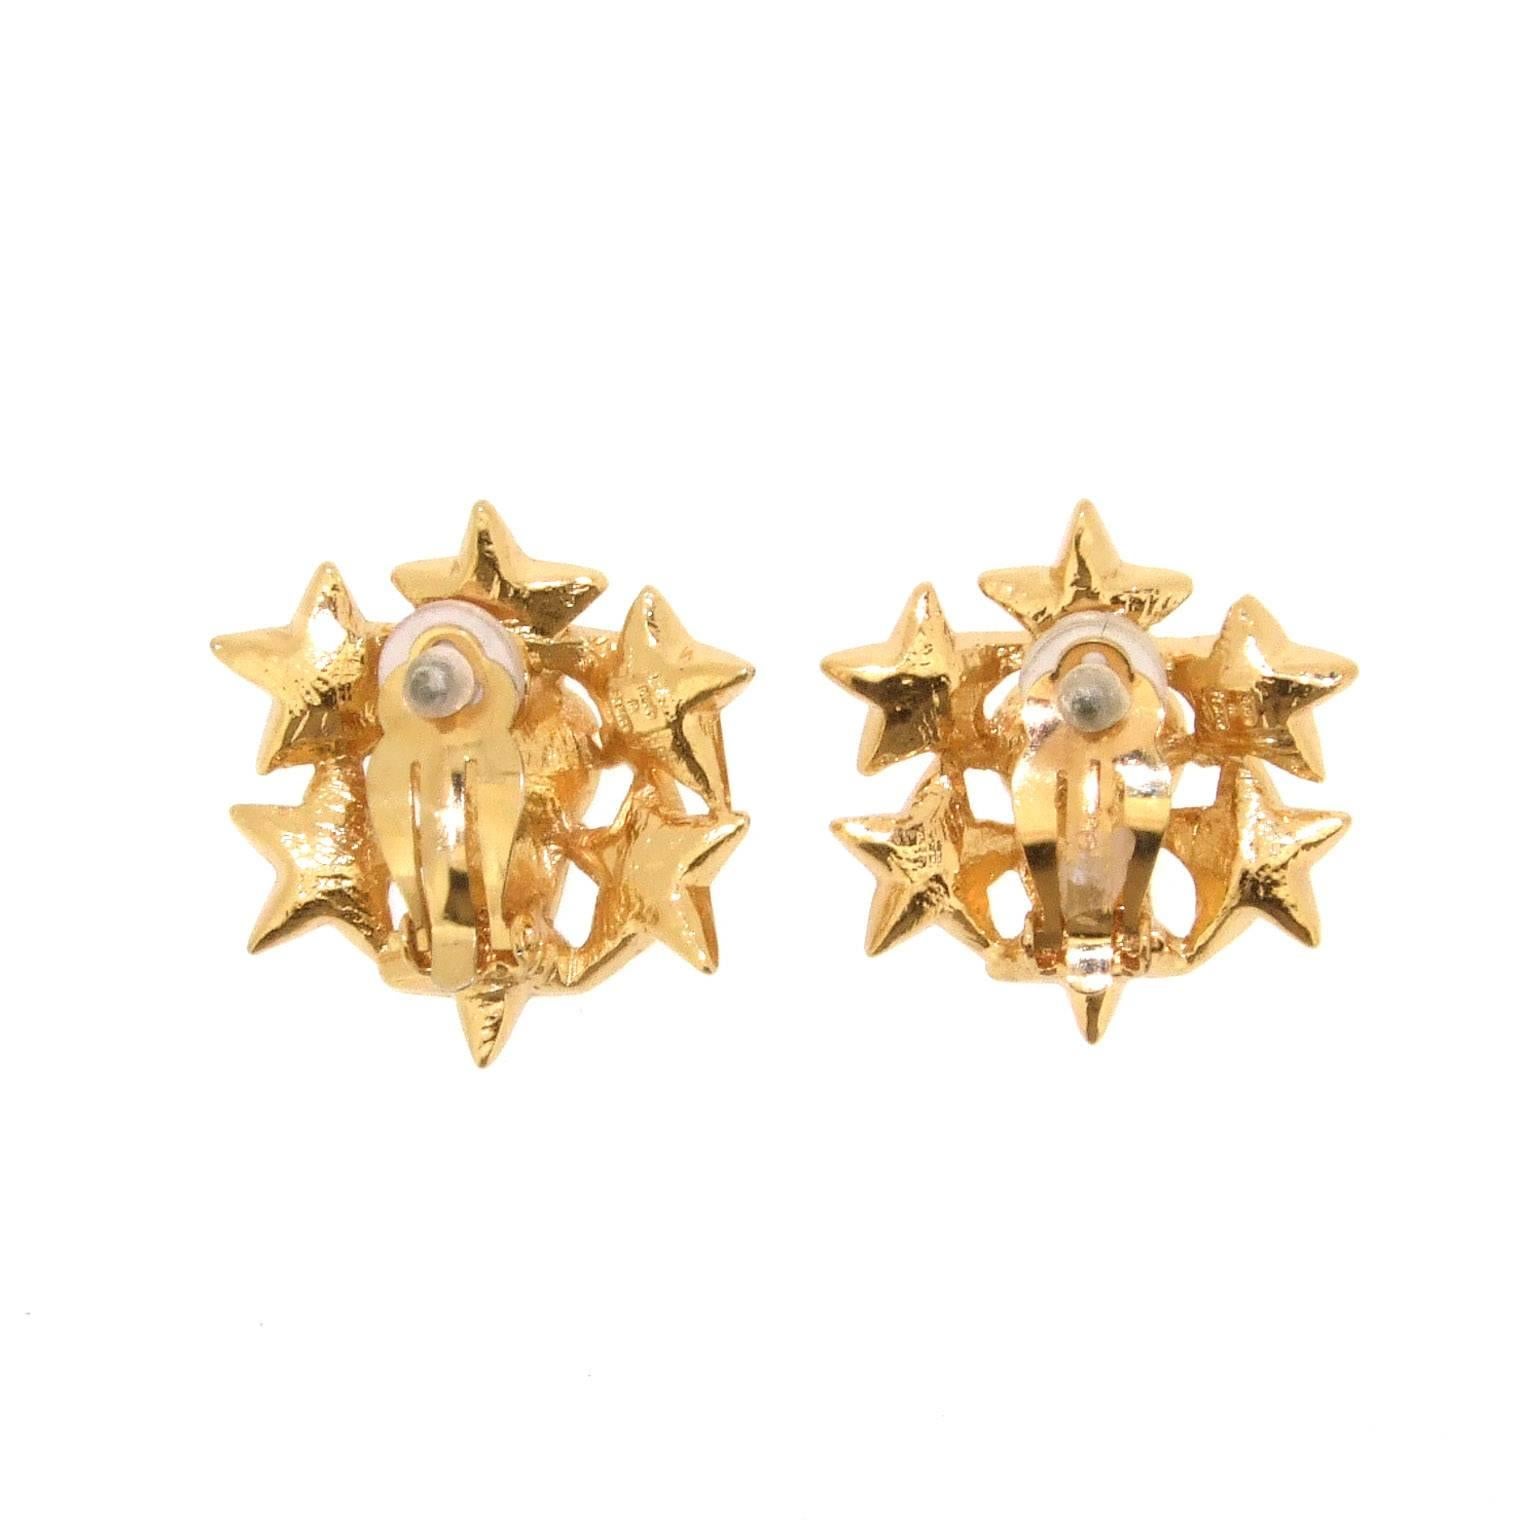 A pair of fabulous clip on earrings by Yves Saint Laurent set with star and heart crystals in gold plated metal.

They measure 3cm wide by 1.3cm deep including the clip. 